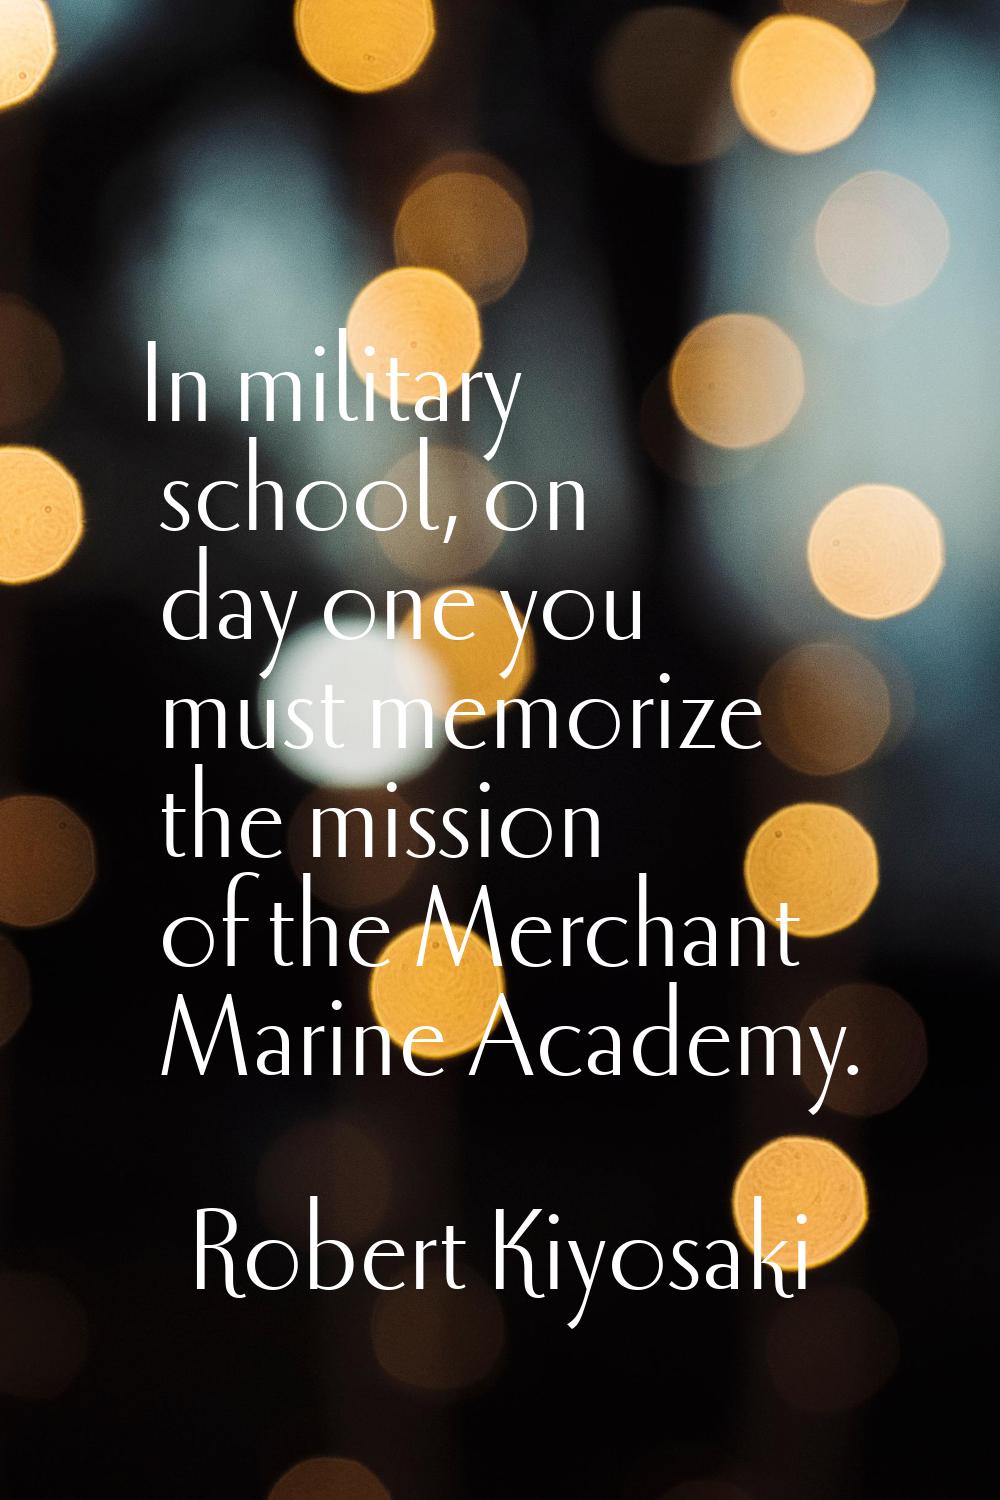 In military school, on day one you must memorize the mission of the Merchant Marine Academy.